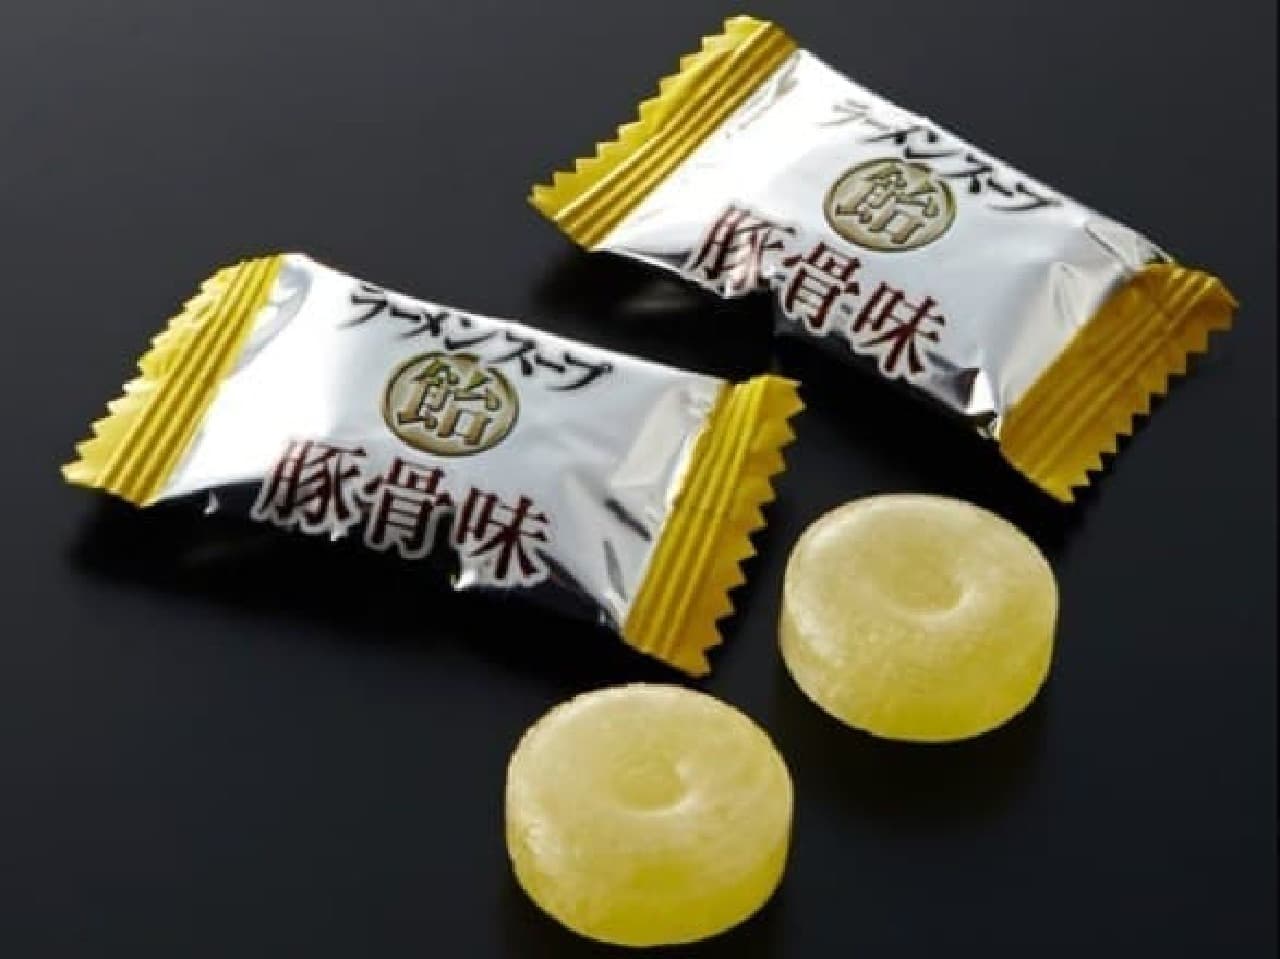 Ramen soup flavored candy ...